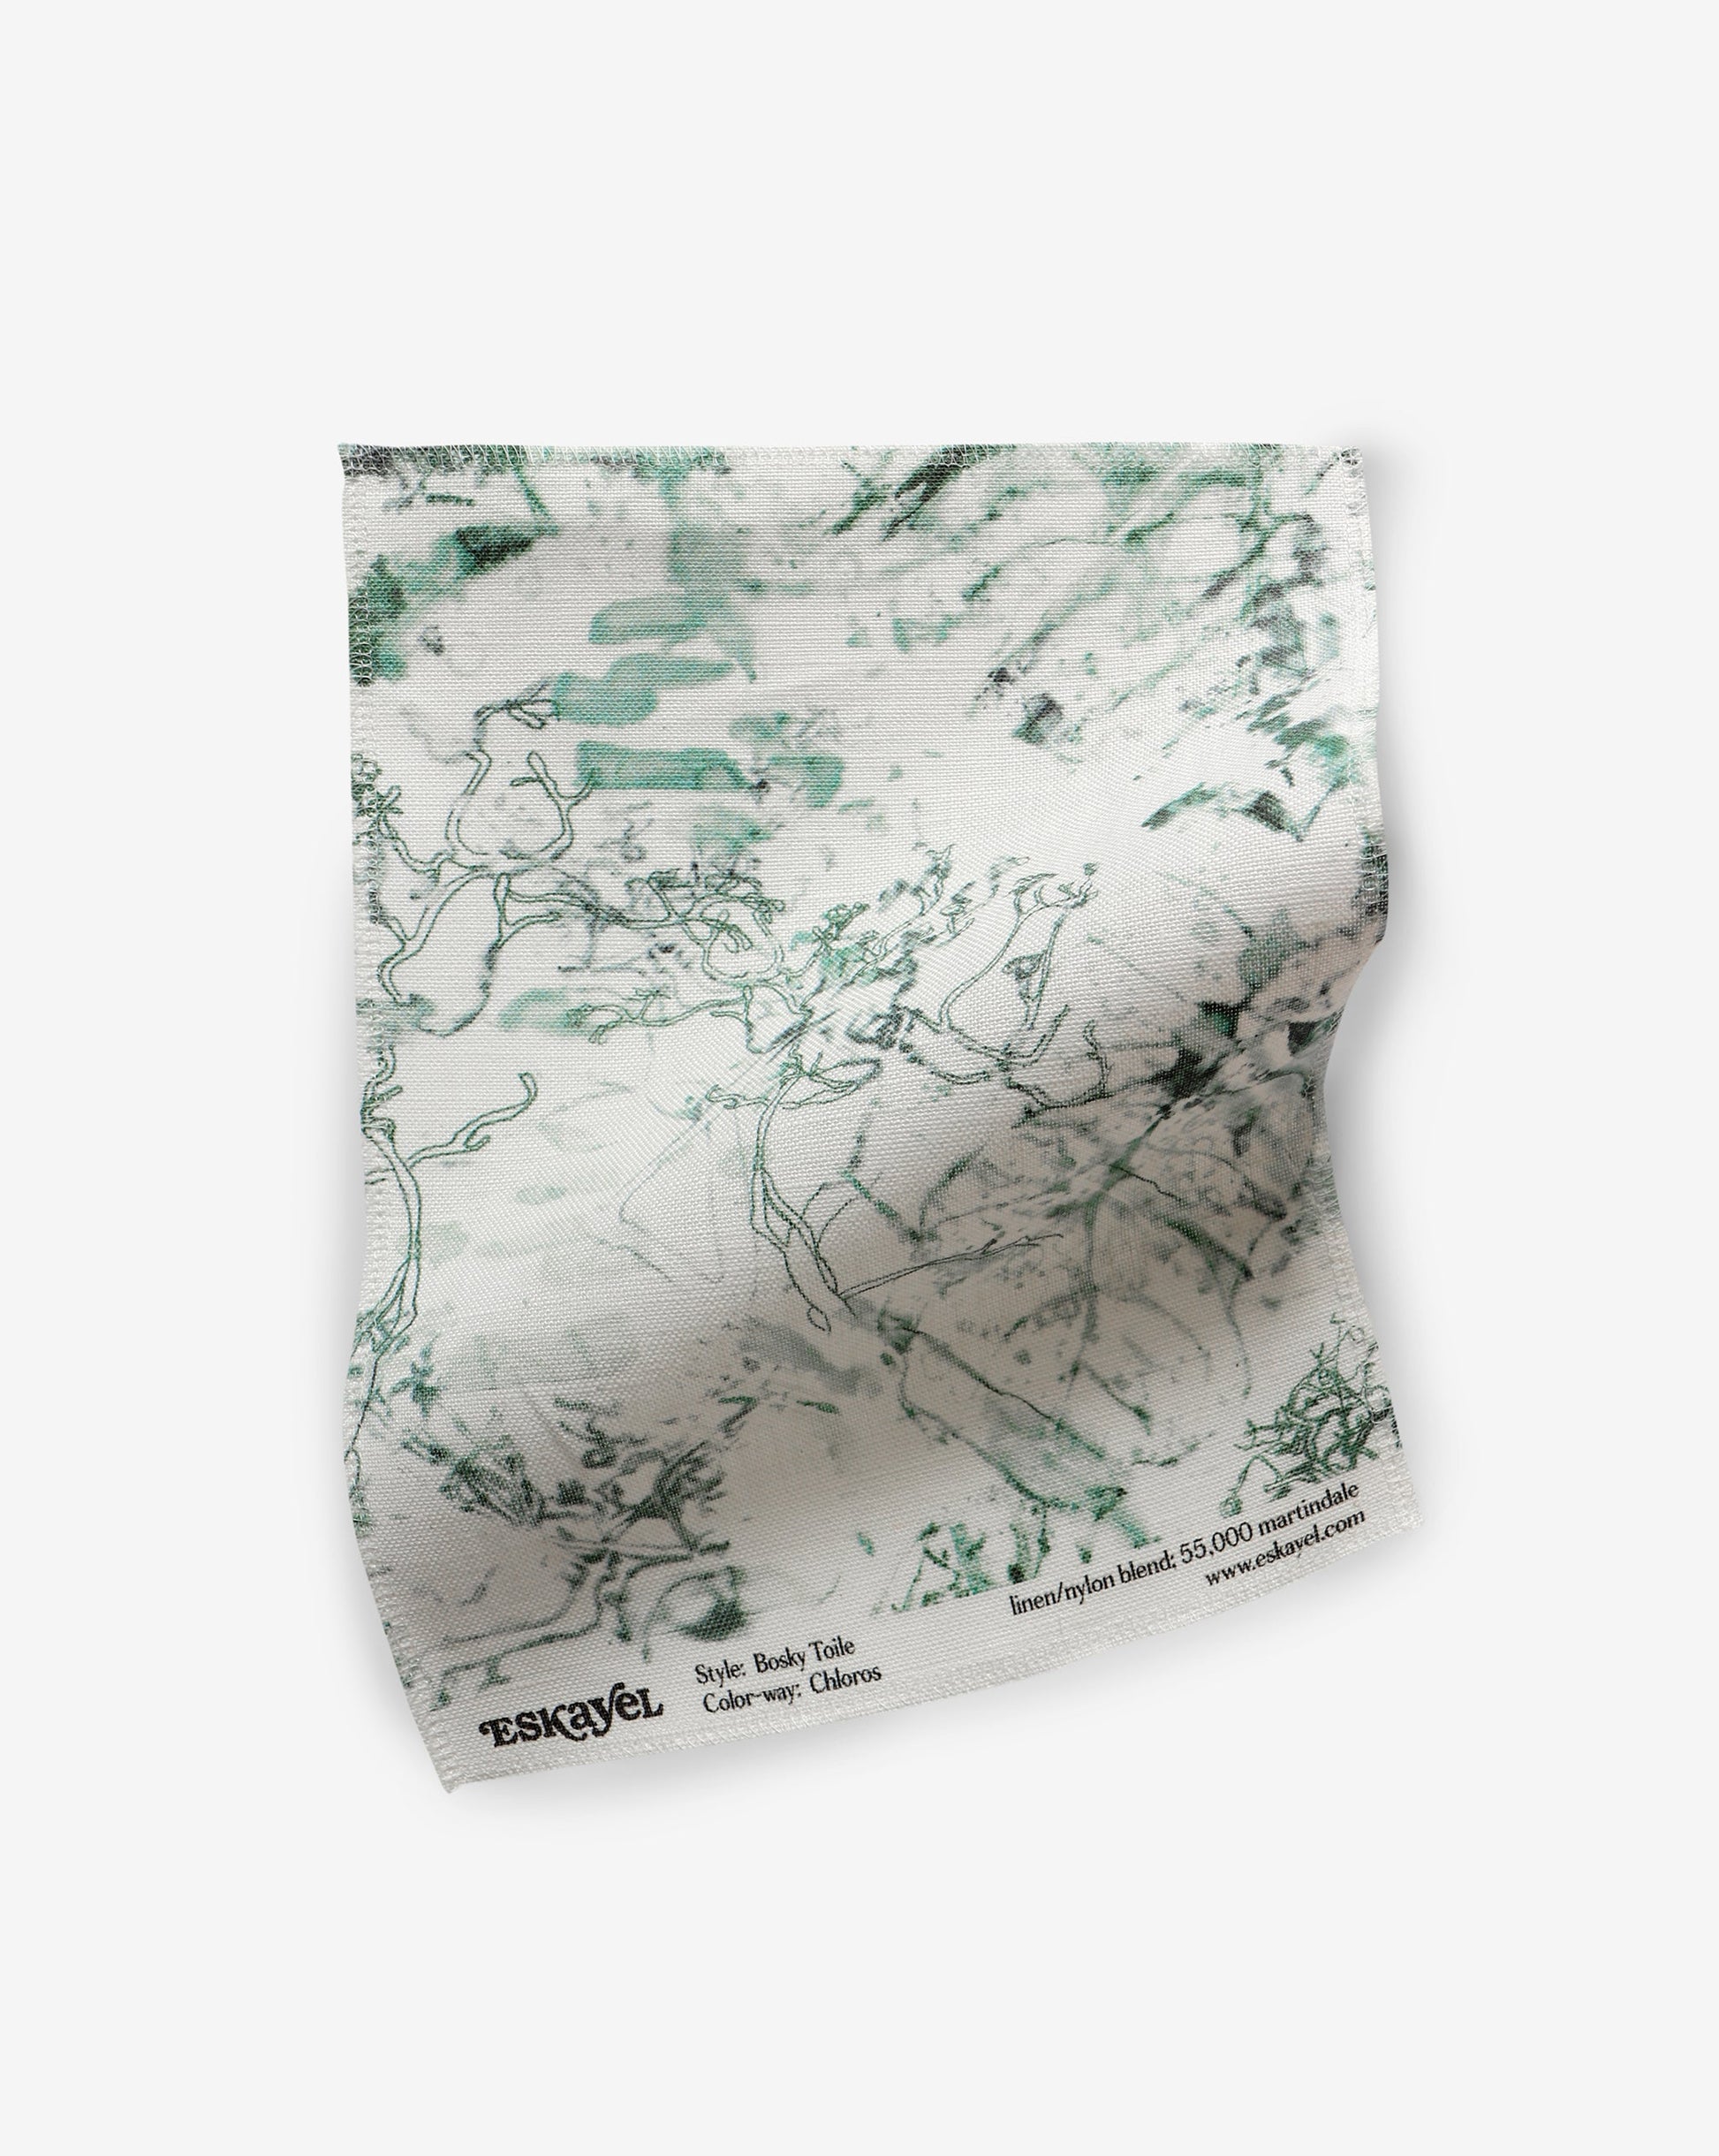 A green and white Bosky Toile Fabric map on a luxury fabric